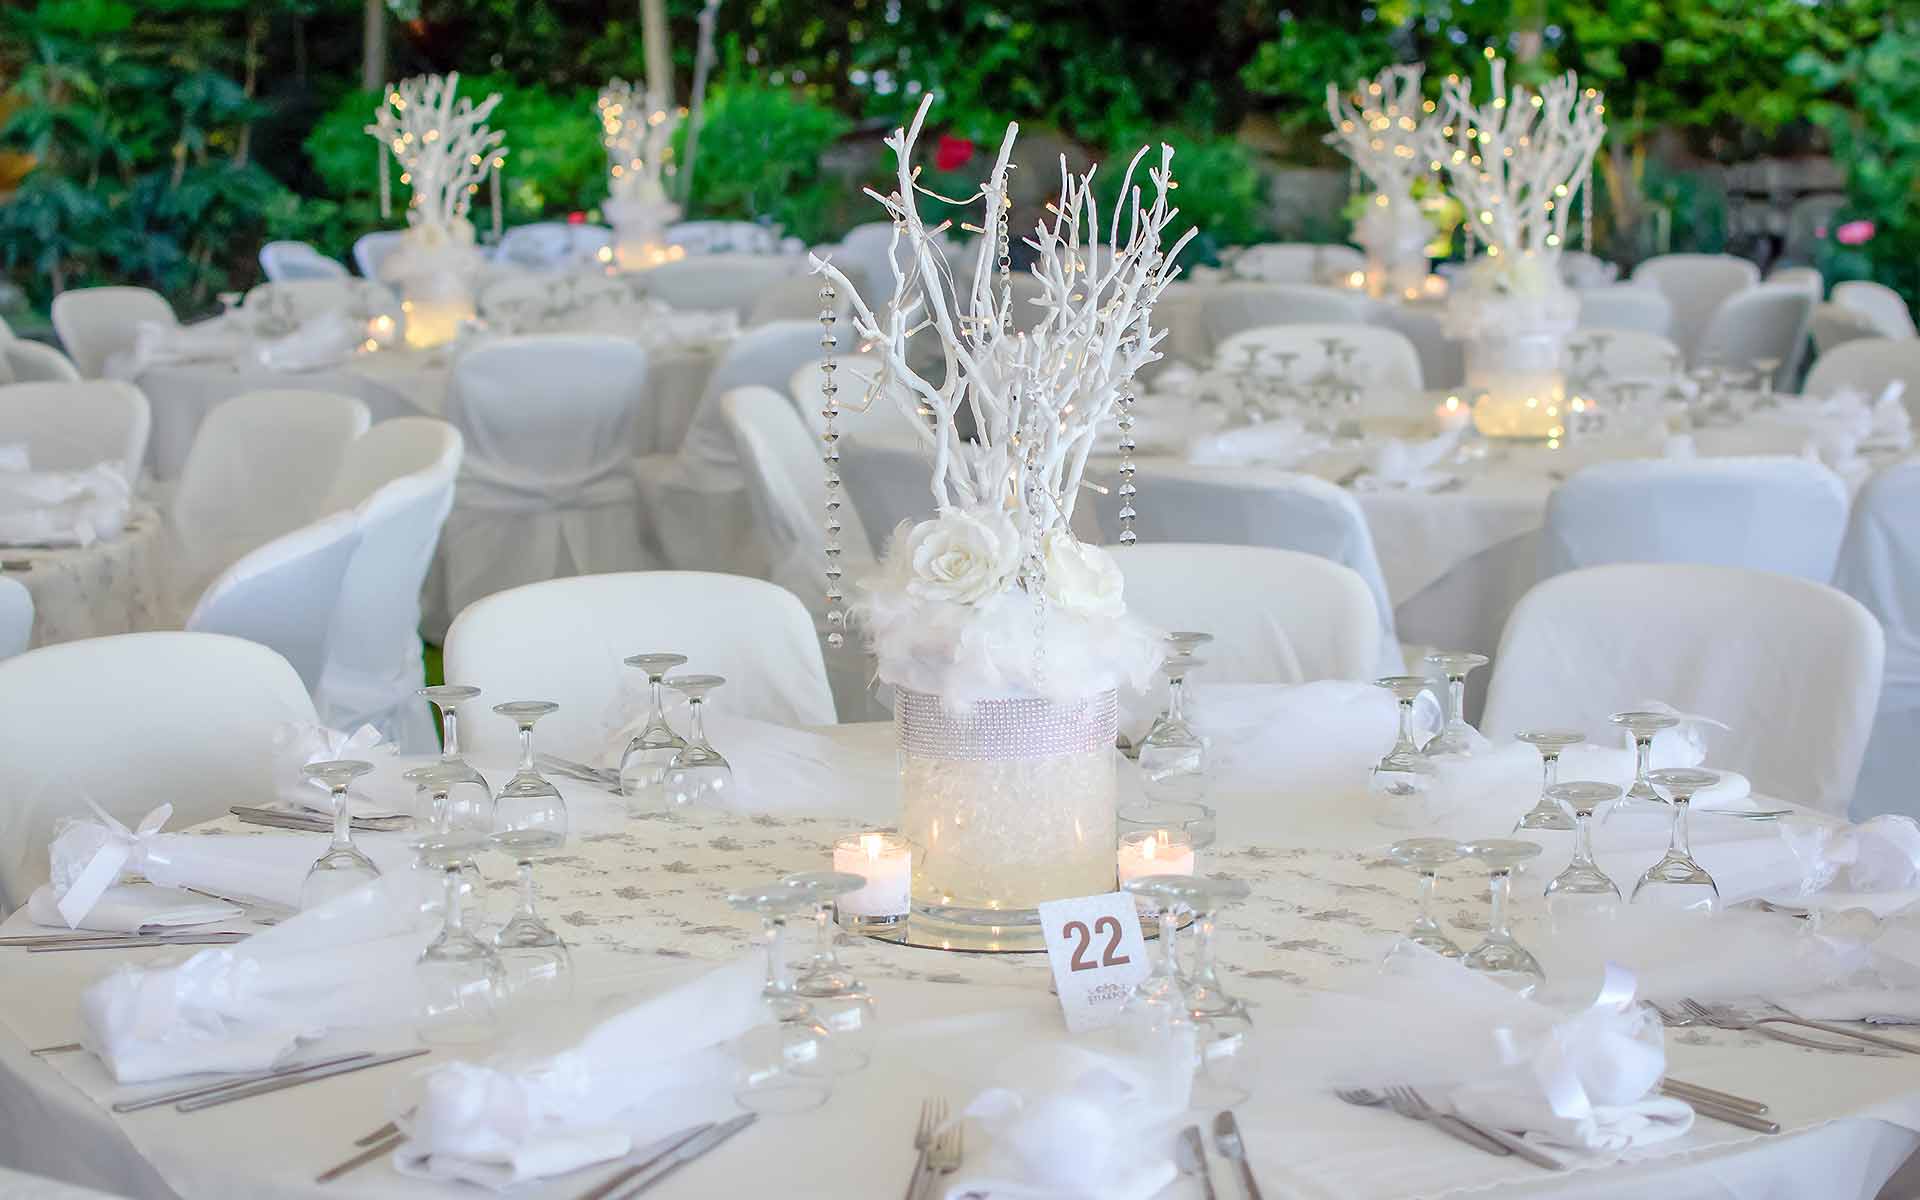 Bonsai trees as table centerpieces is another popular use for them in weddings